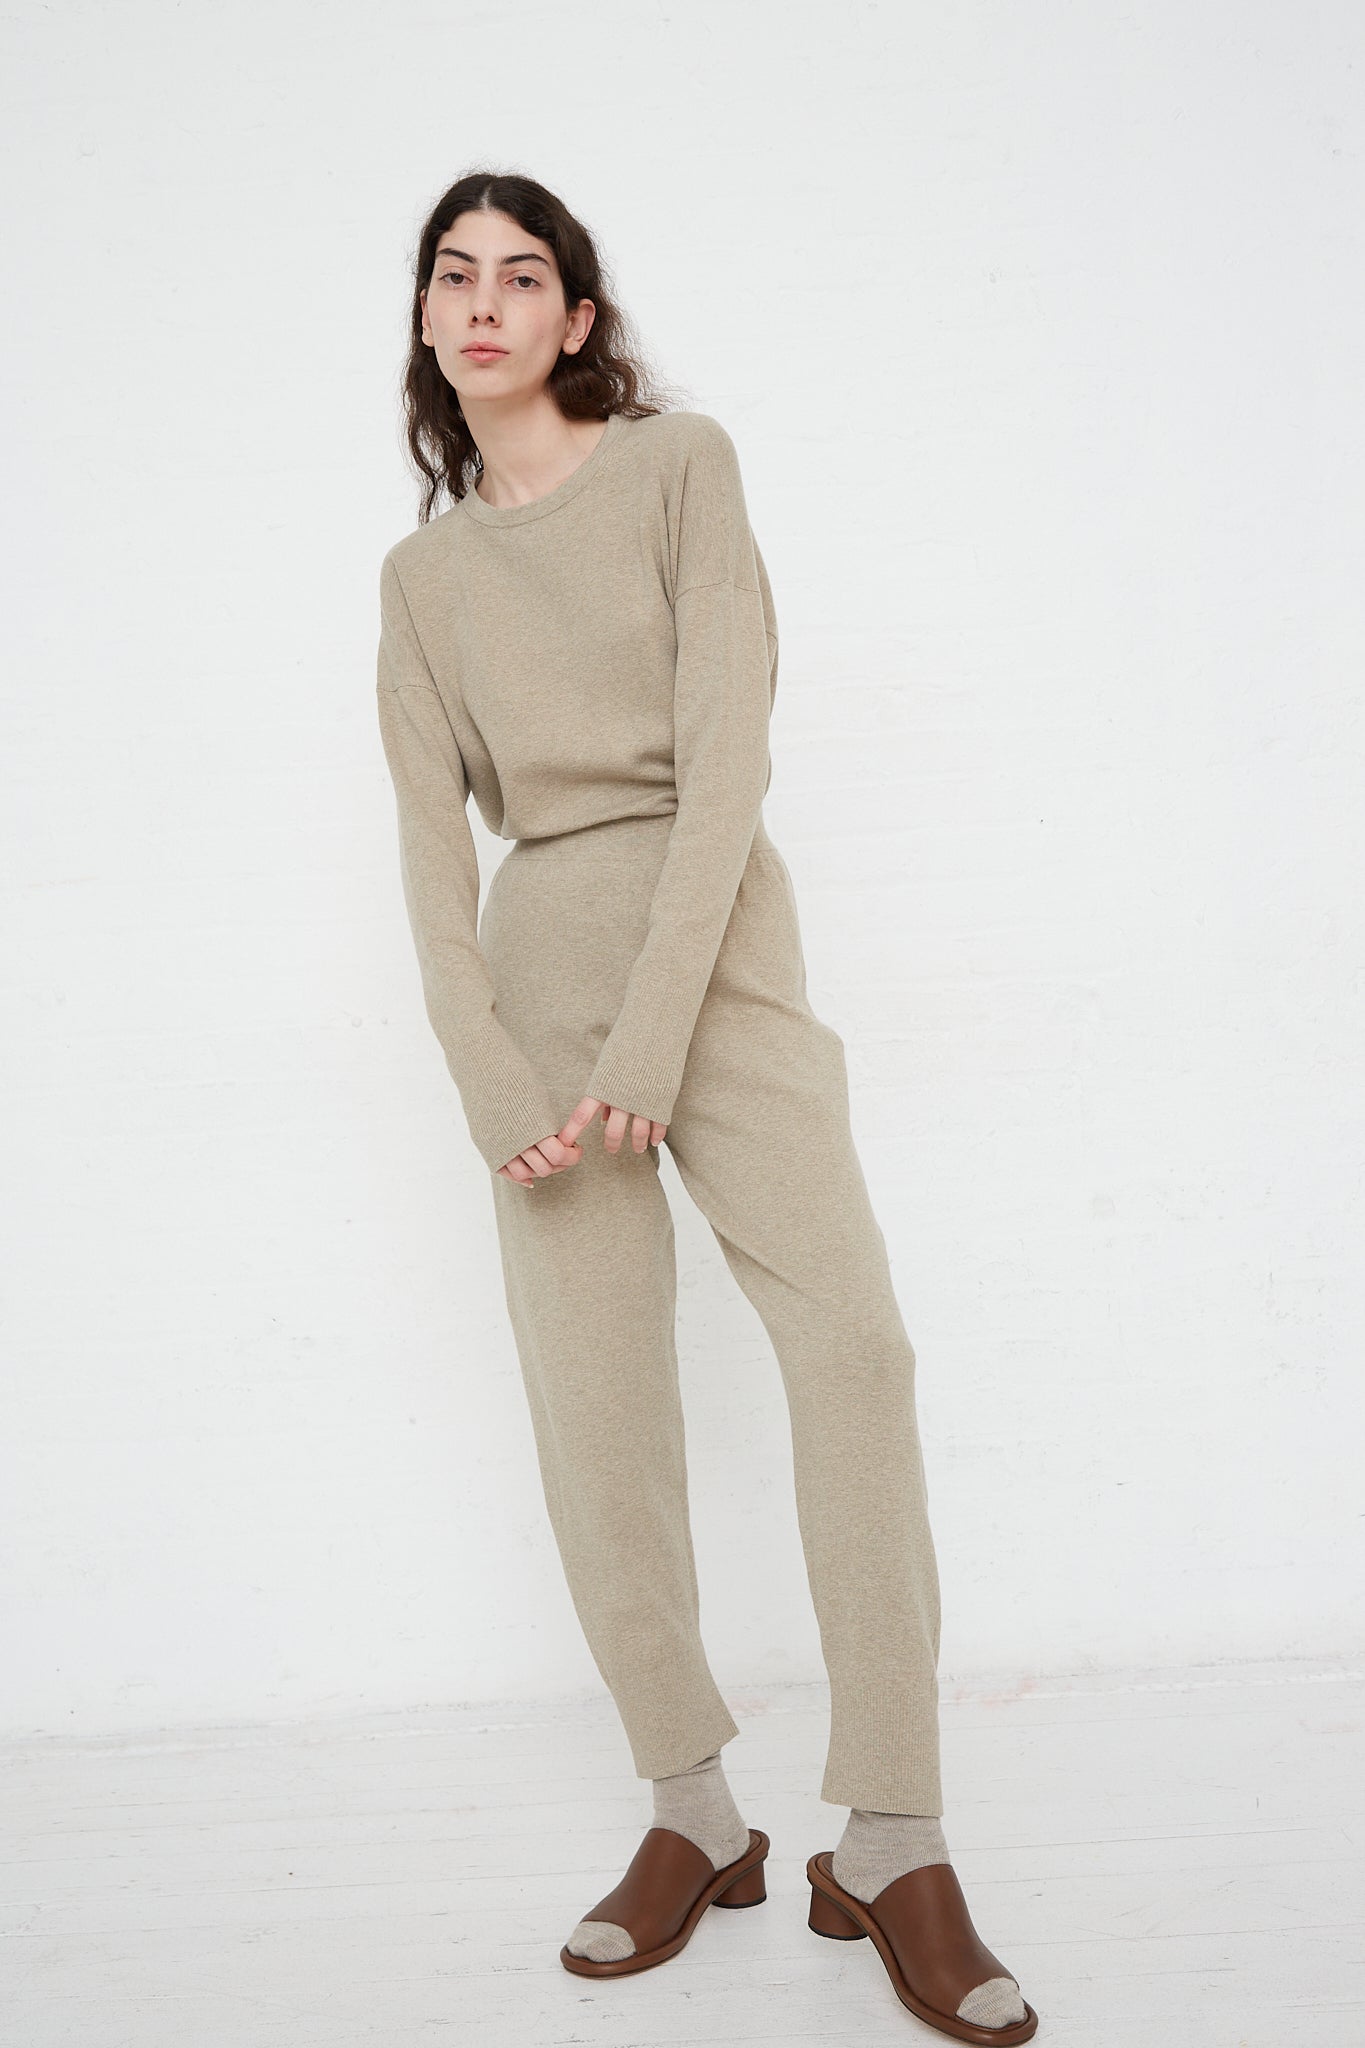 The model is wearing a beige sweater and soft Lauren Manoogian's Base Pant in Stone Melange. Front view and full length.